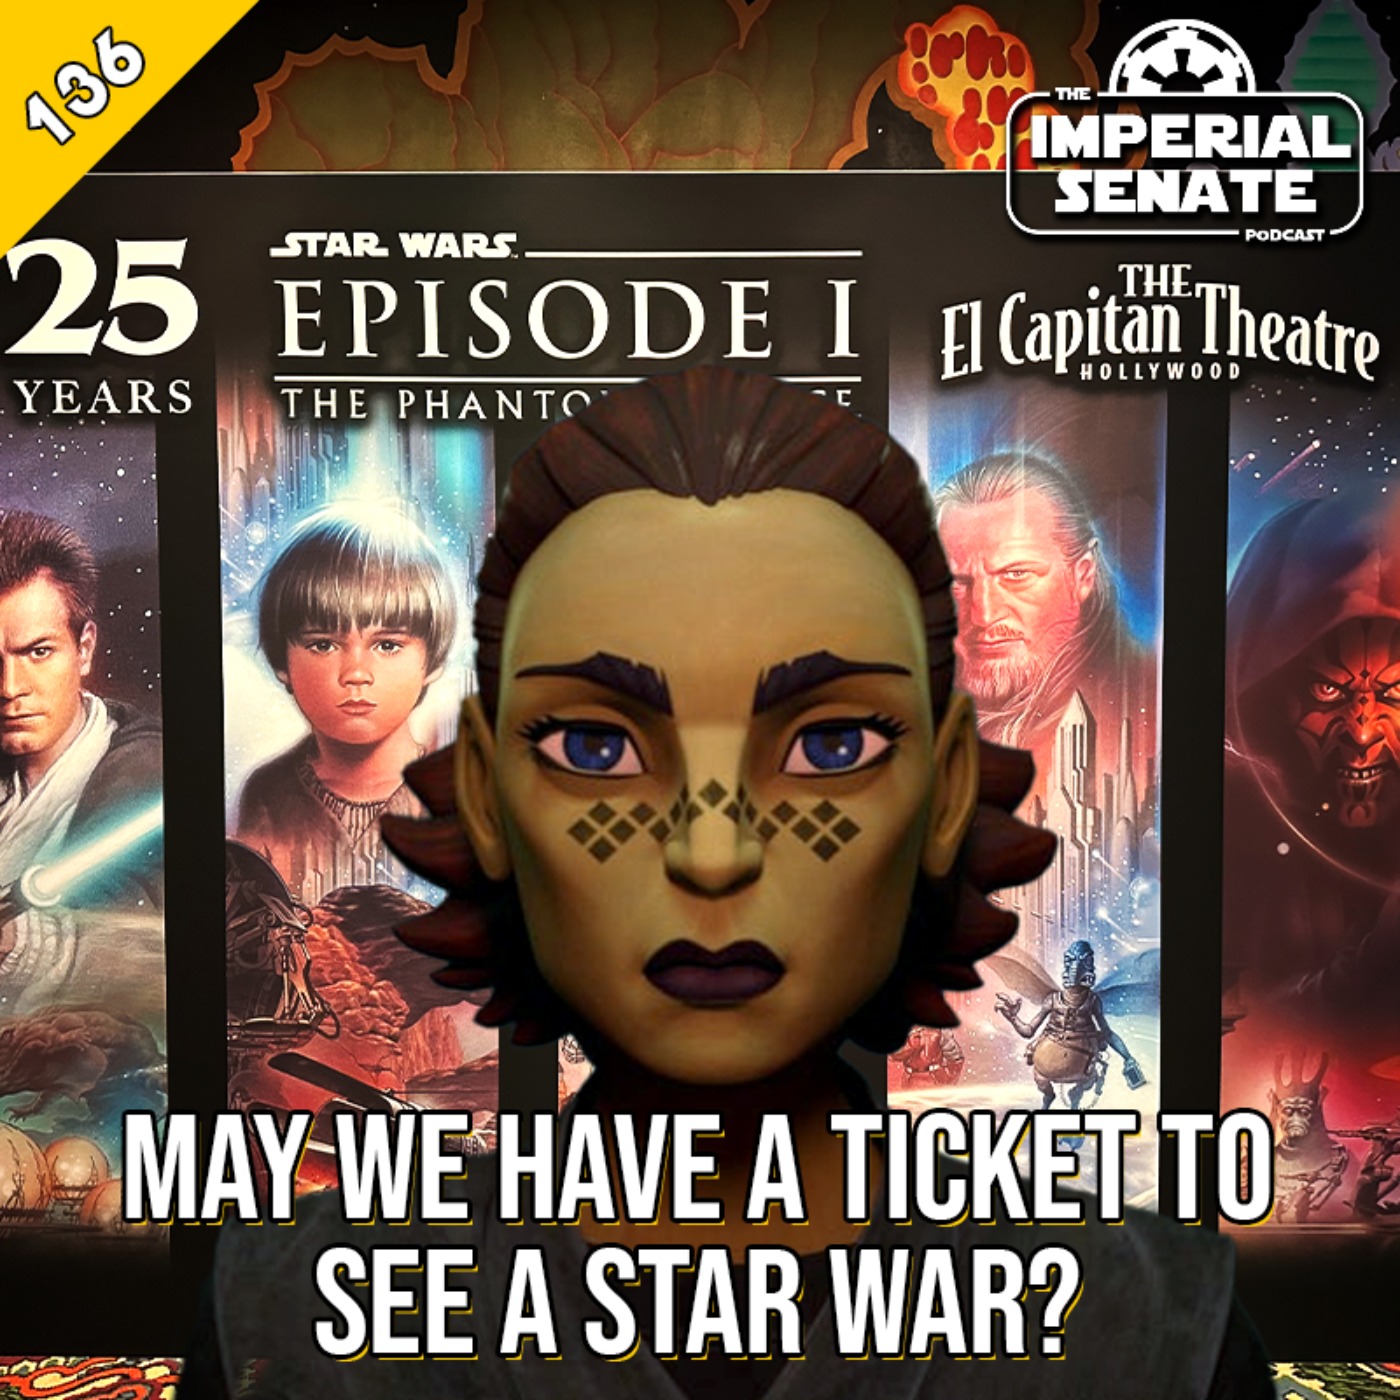 The Imperial Senate Podcast: Episode 136 - May We Have A Ticket To See A Star War?